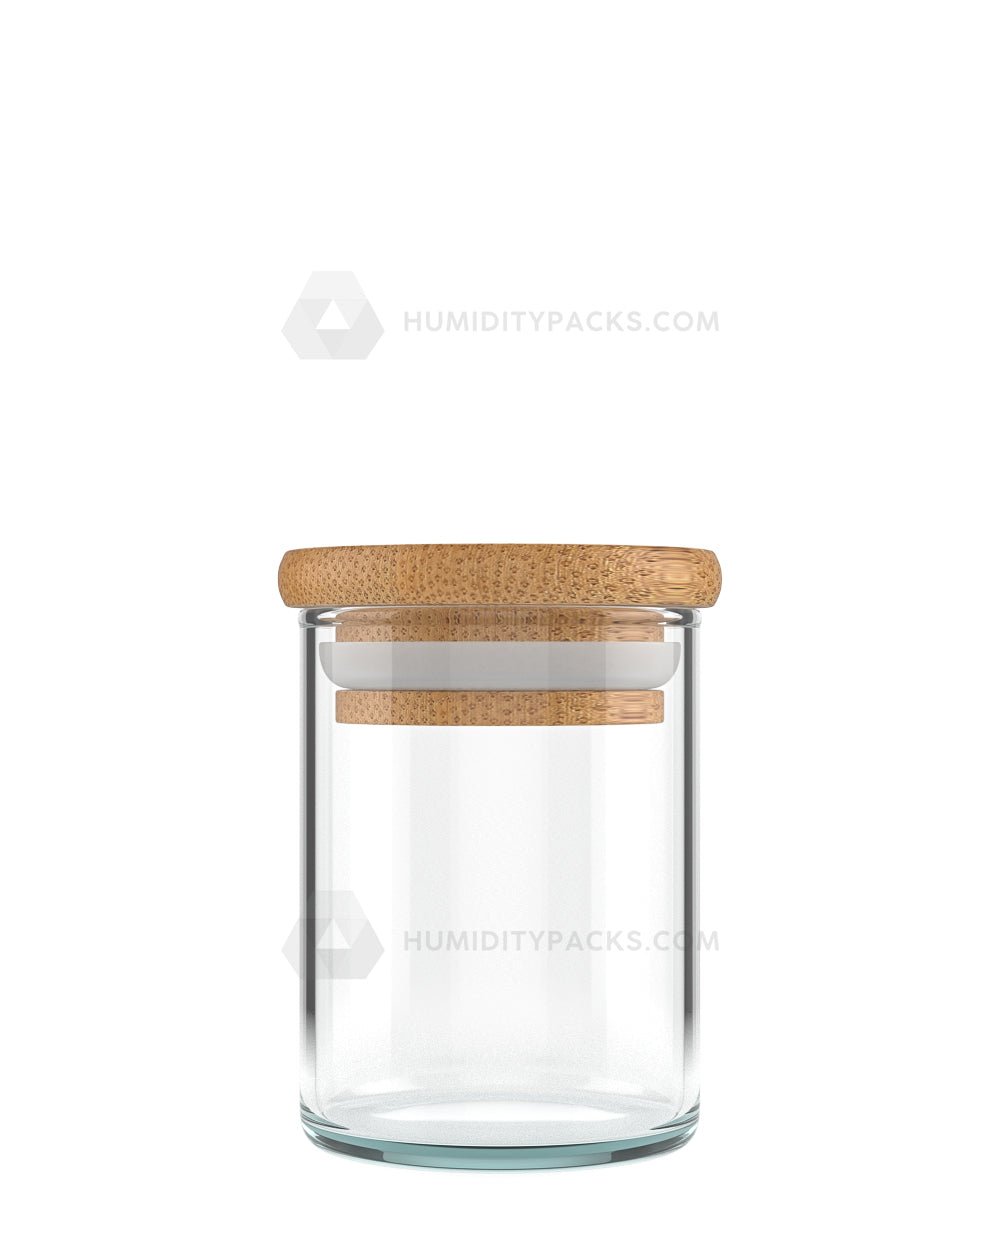 2oz Glass Jar with Wooden Lid 200/Box Humidity Packs - 1